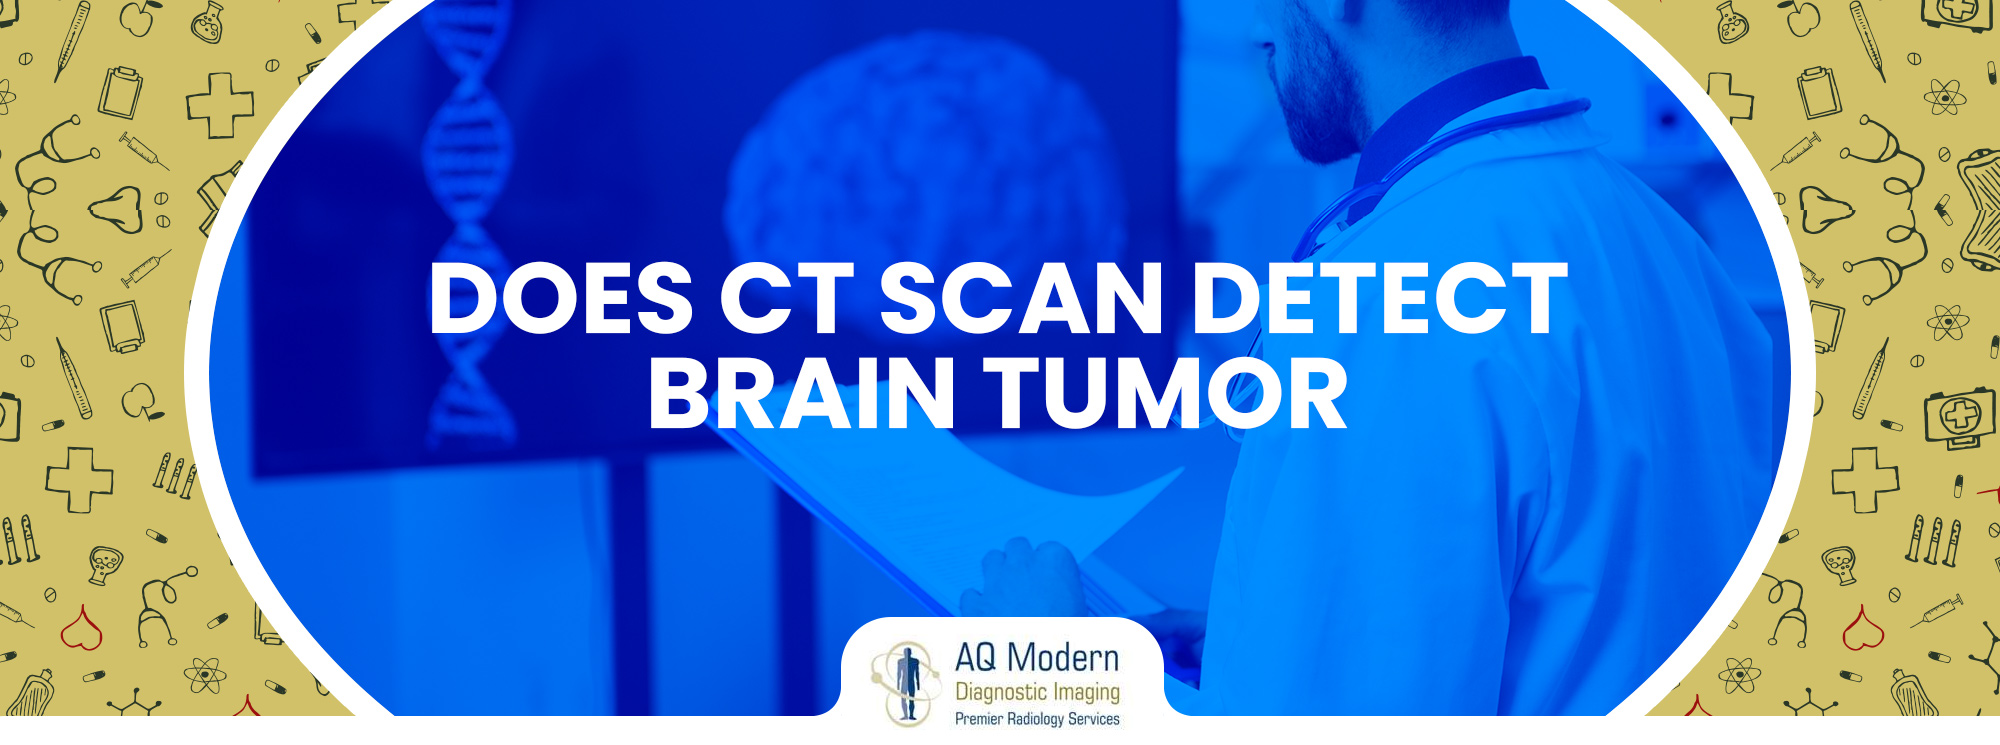 Does CT Scan Detect brain tumor